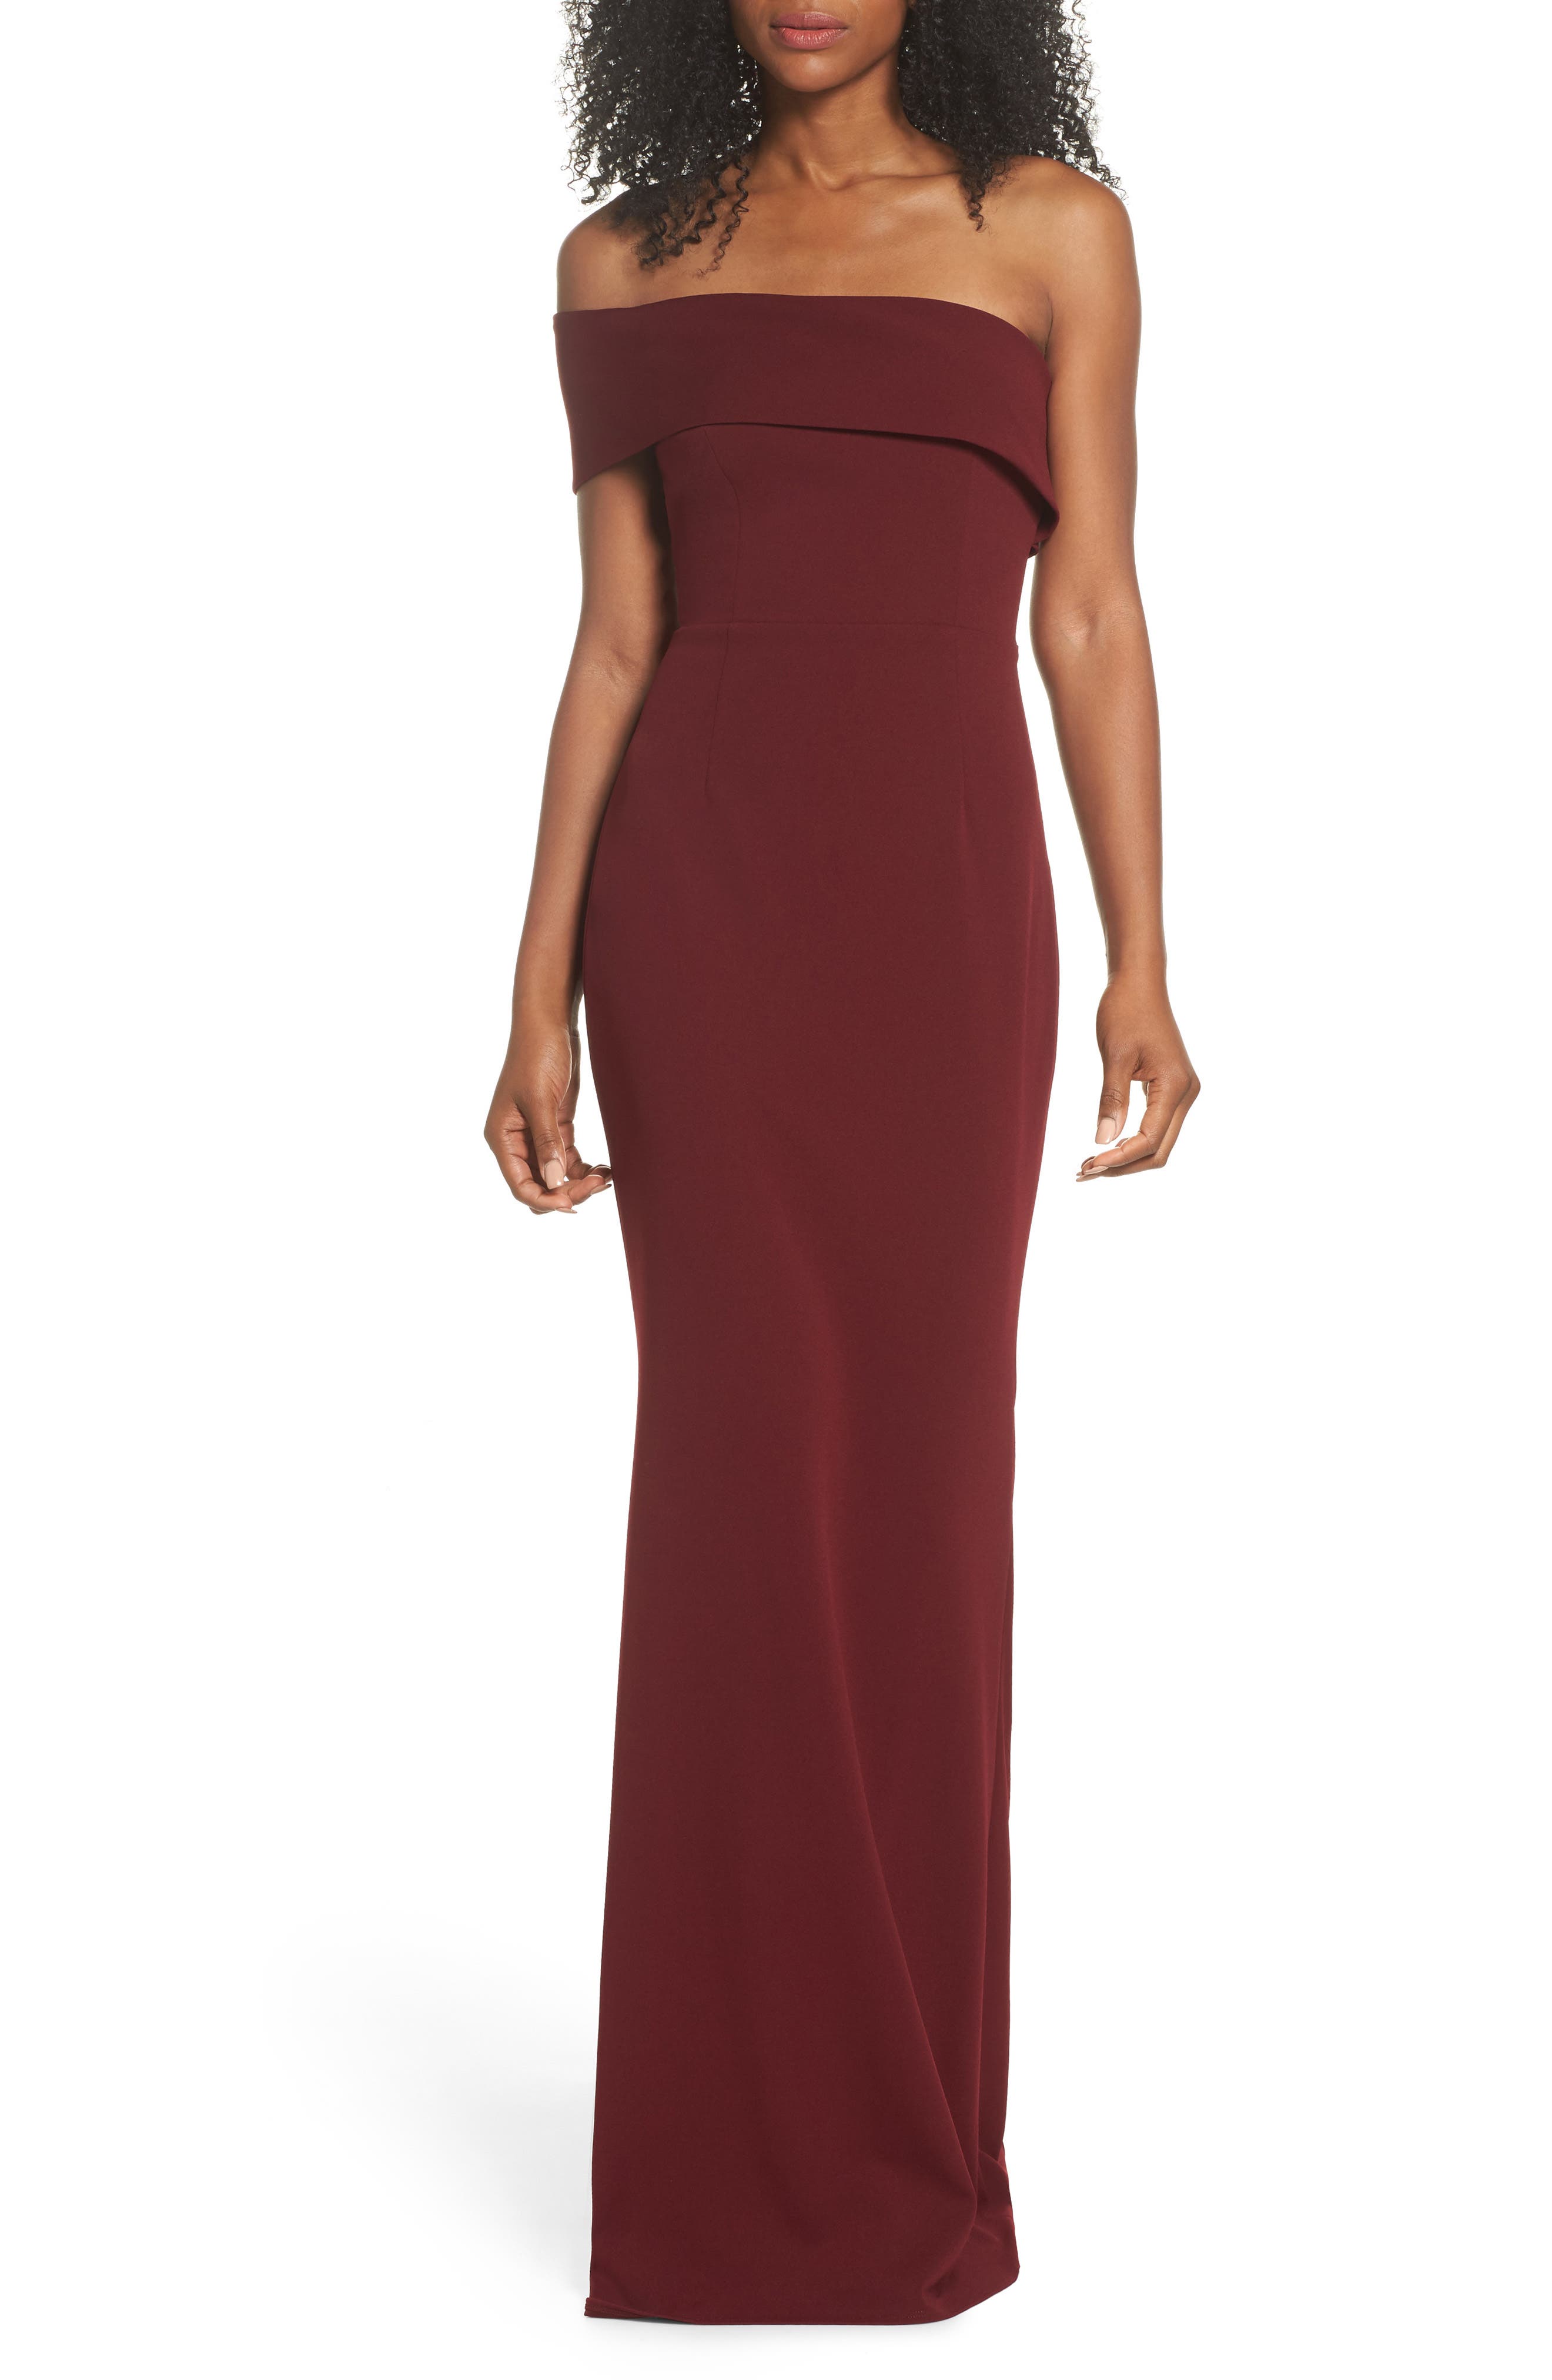 katie may one shoulder gown